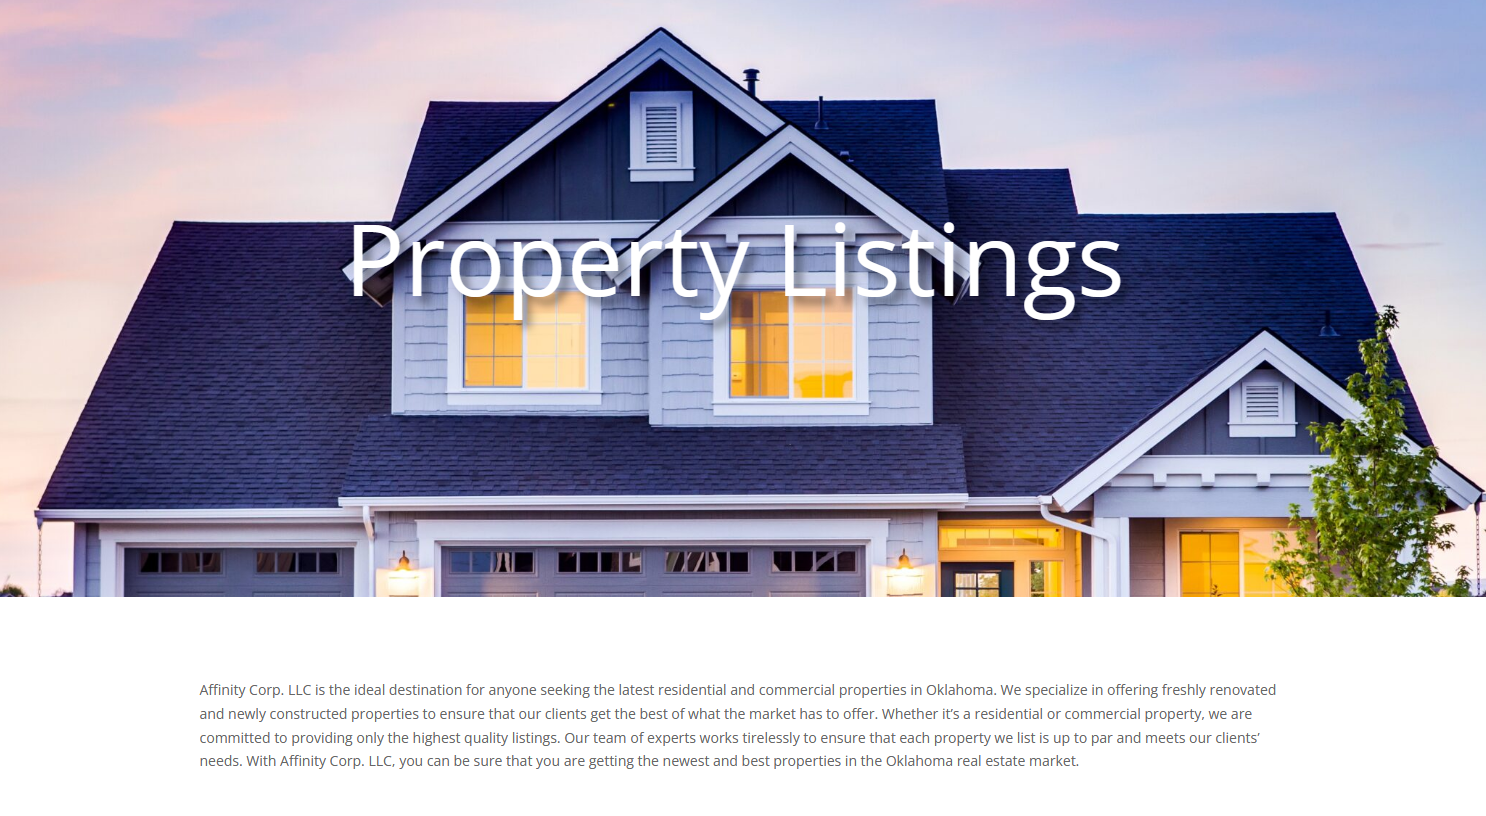 Image of screenshot of property listings feature on a website. Primarily is an image of a house.